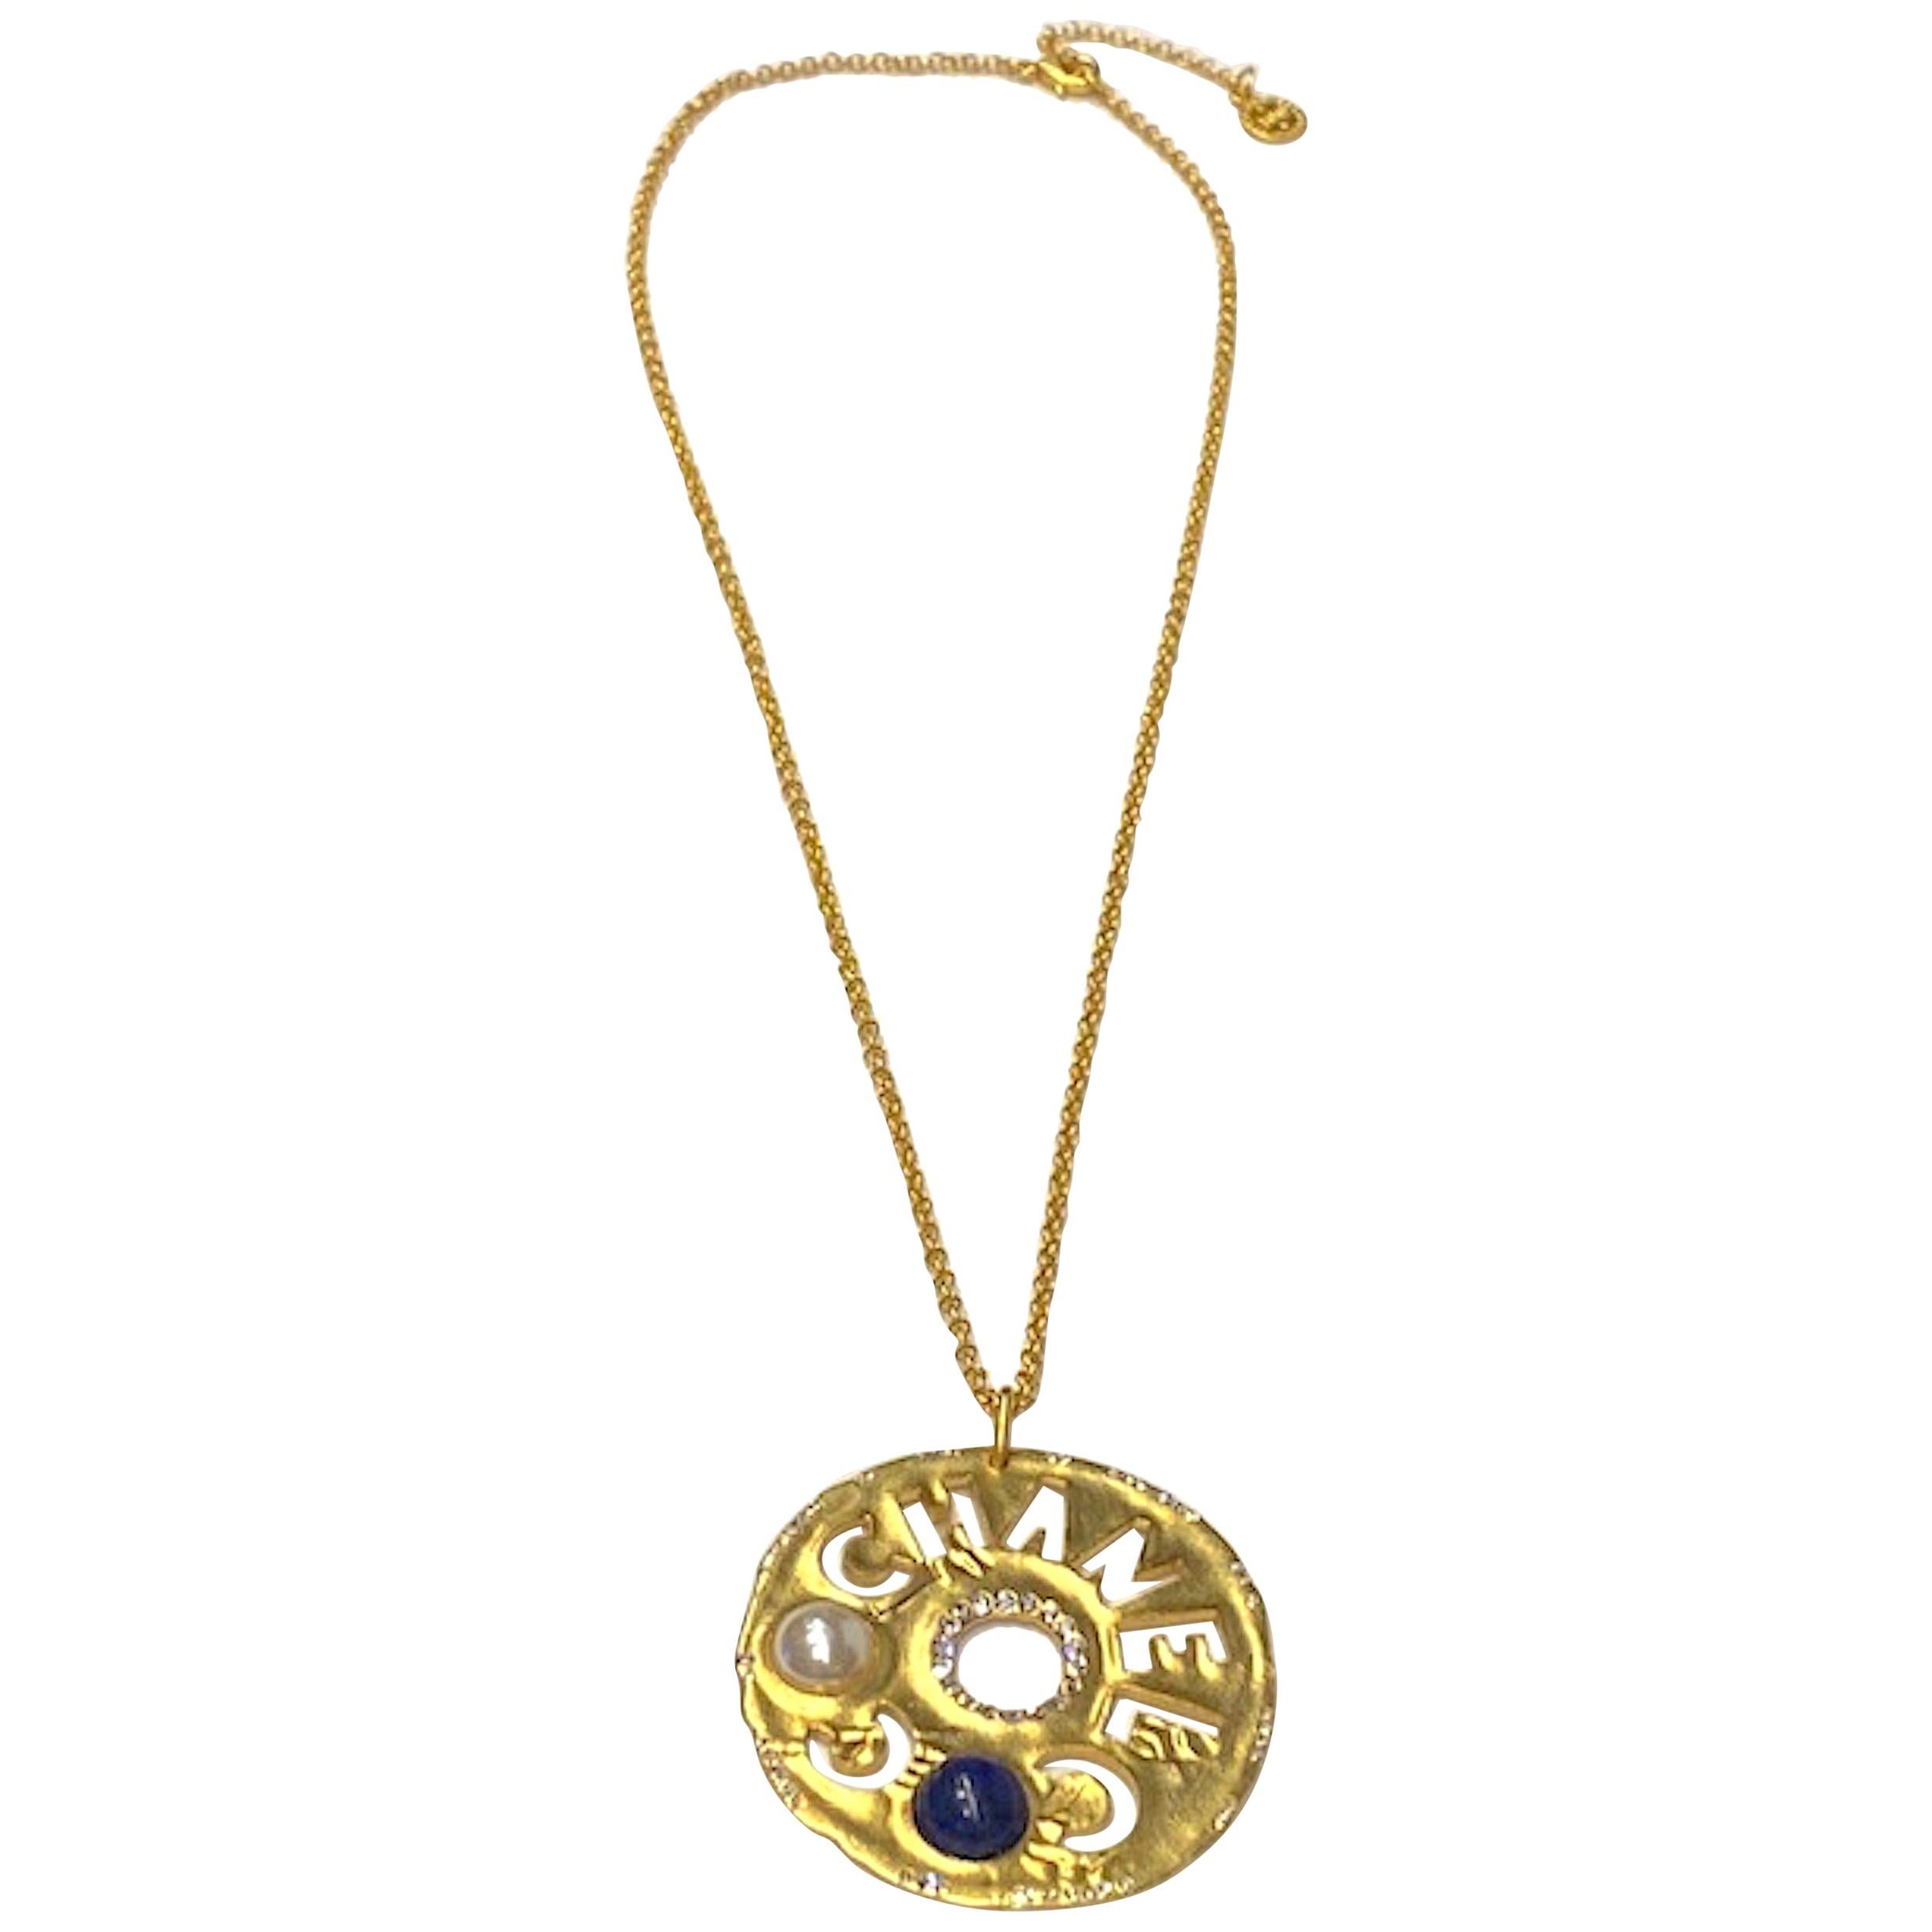 Chanel Cut Out Disk Pendant Necklace, 2019 Cruise Collection